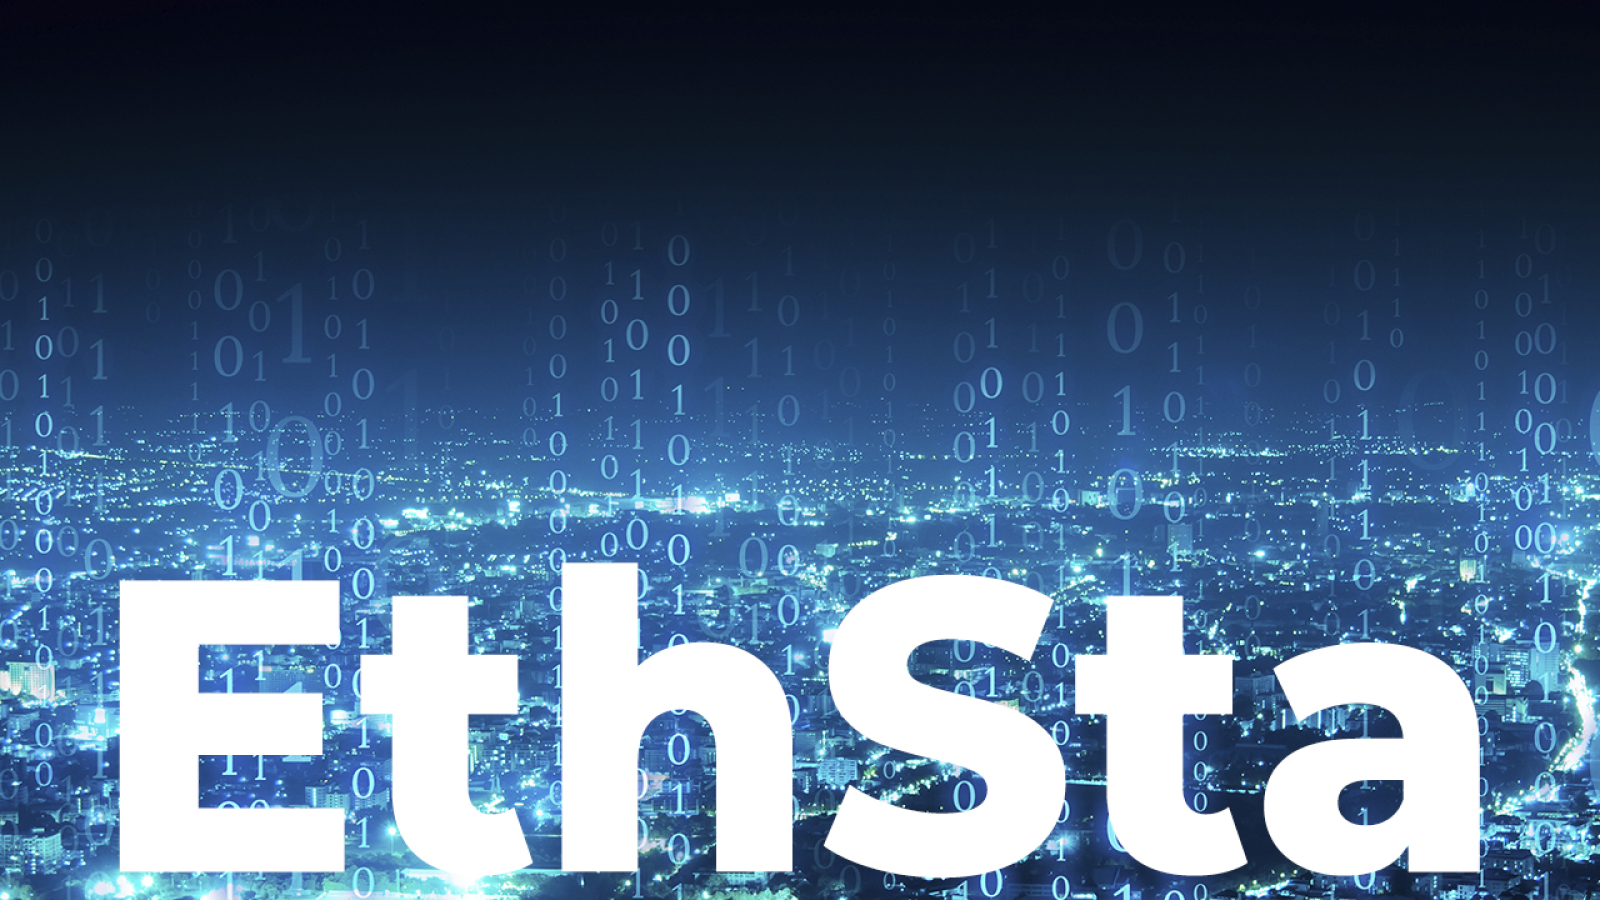 EthSta Platform Goes Live to Display ETH2 Staking Metrics in Real Time